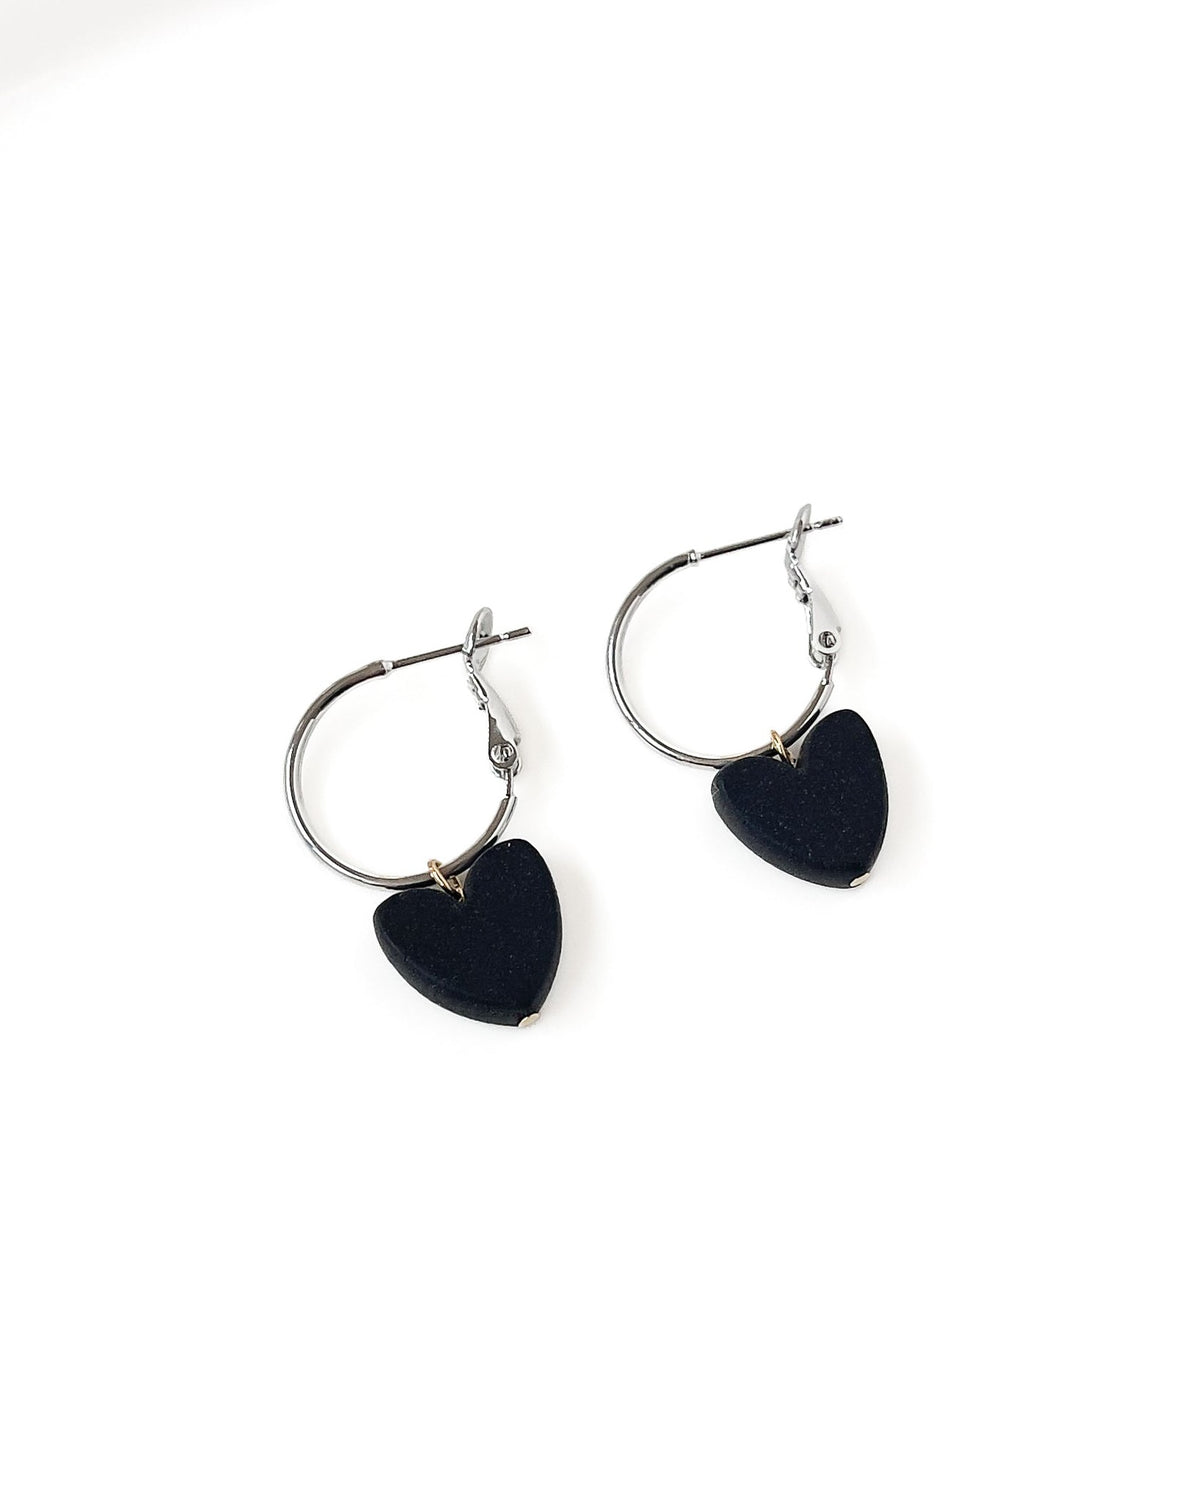 Charming Heart earrings with silver regular Hoops and black Heart charm.